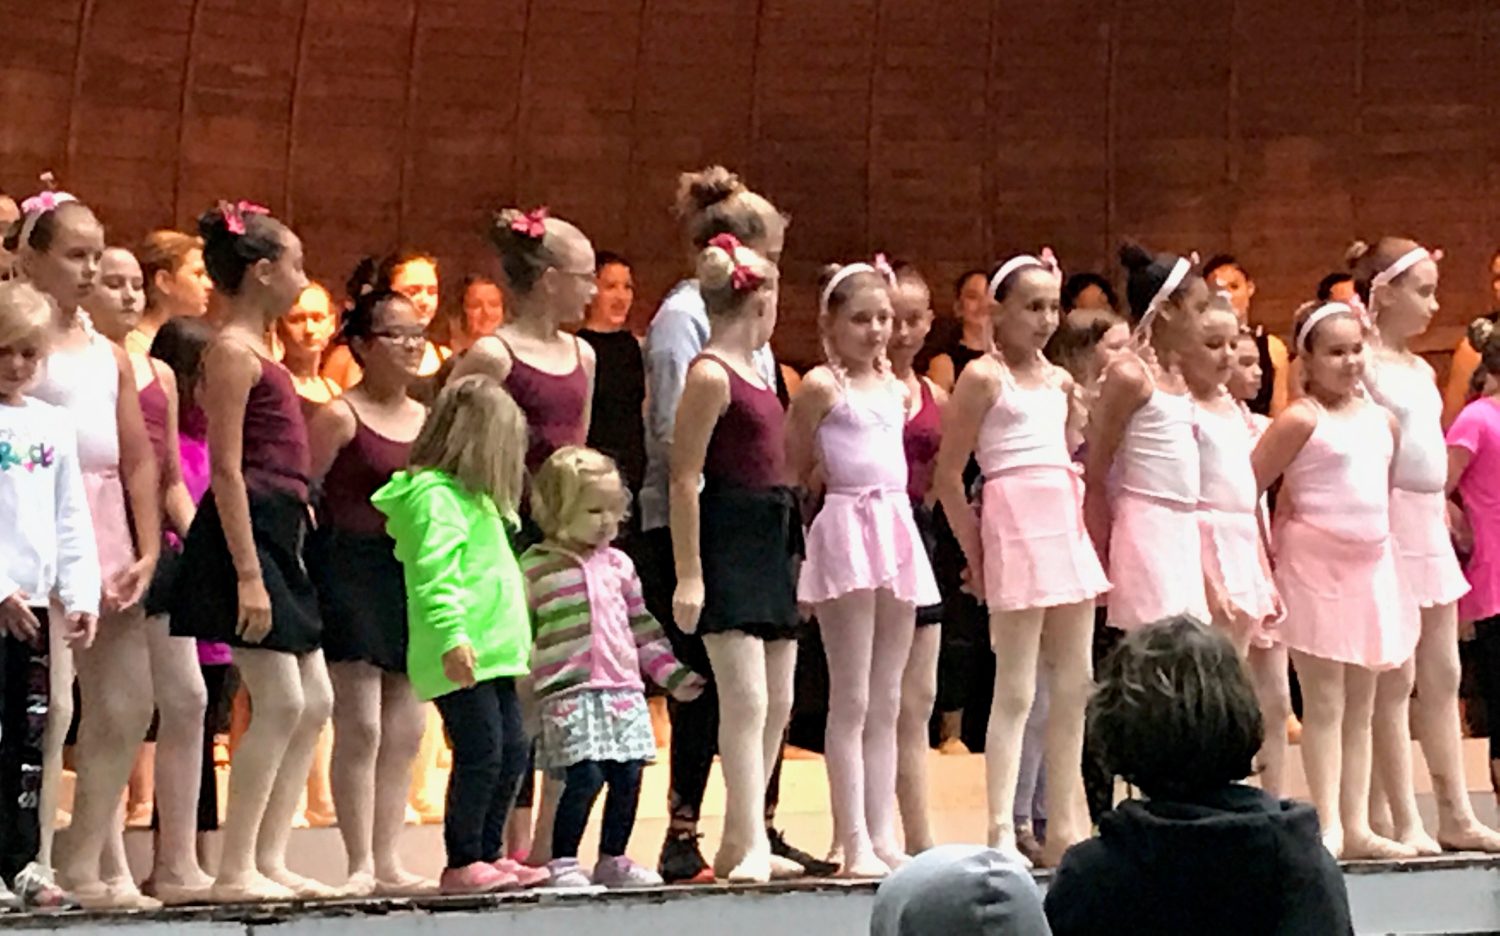 This year’s Ballet in the Park featured students from the Conservatory’s Classical Ballet Program Summer Intensive and the Marshfield Youth Ballet Company.